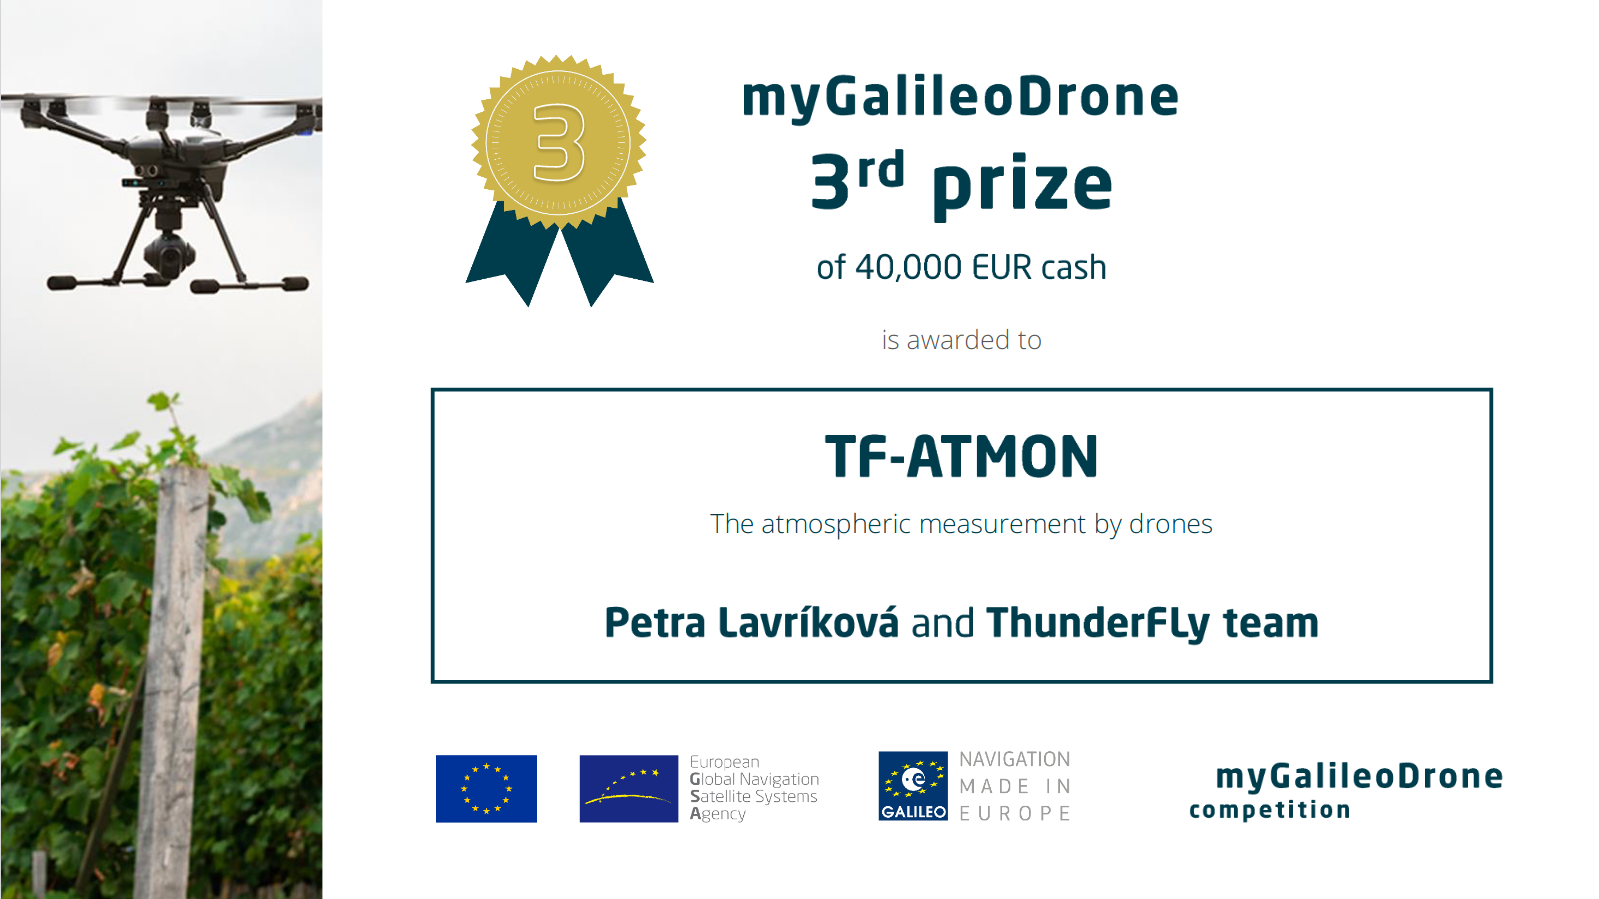 MyGalieoDrone competition certificate